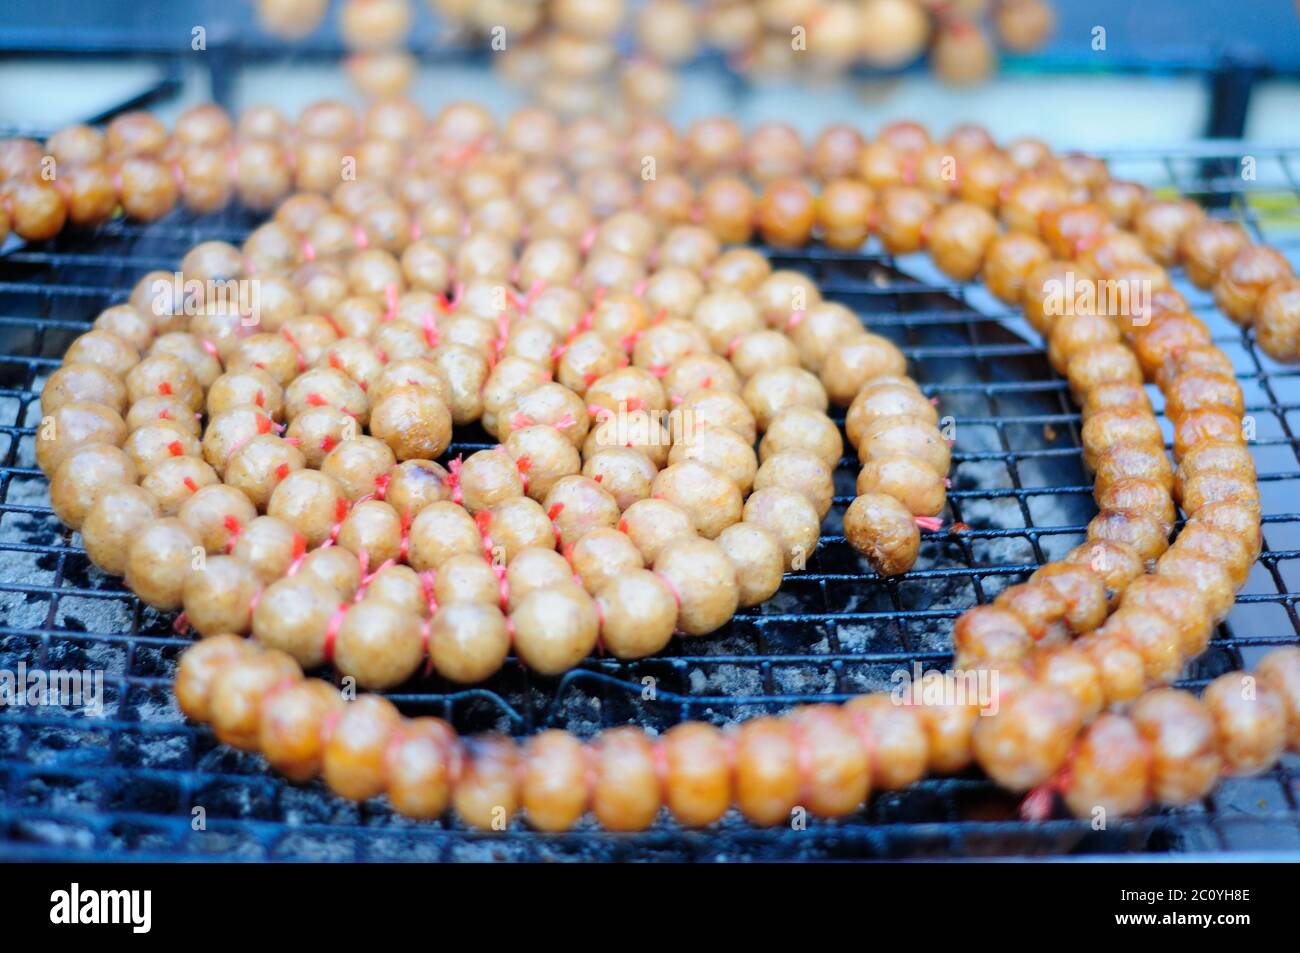 Grilling Round Thai Sausages Stock Photo